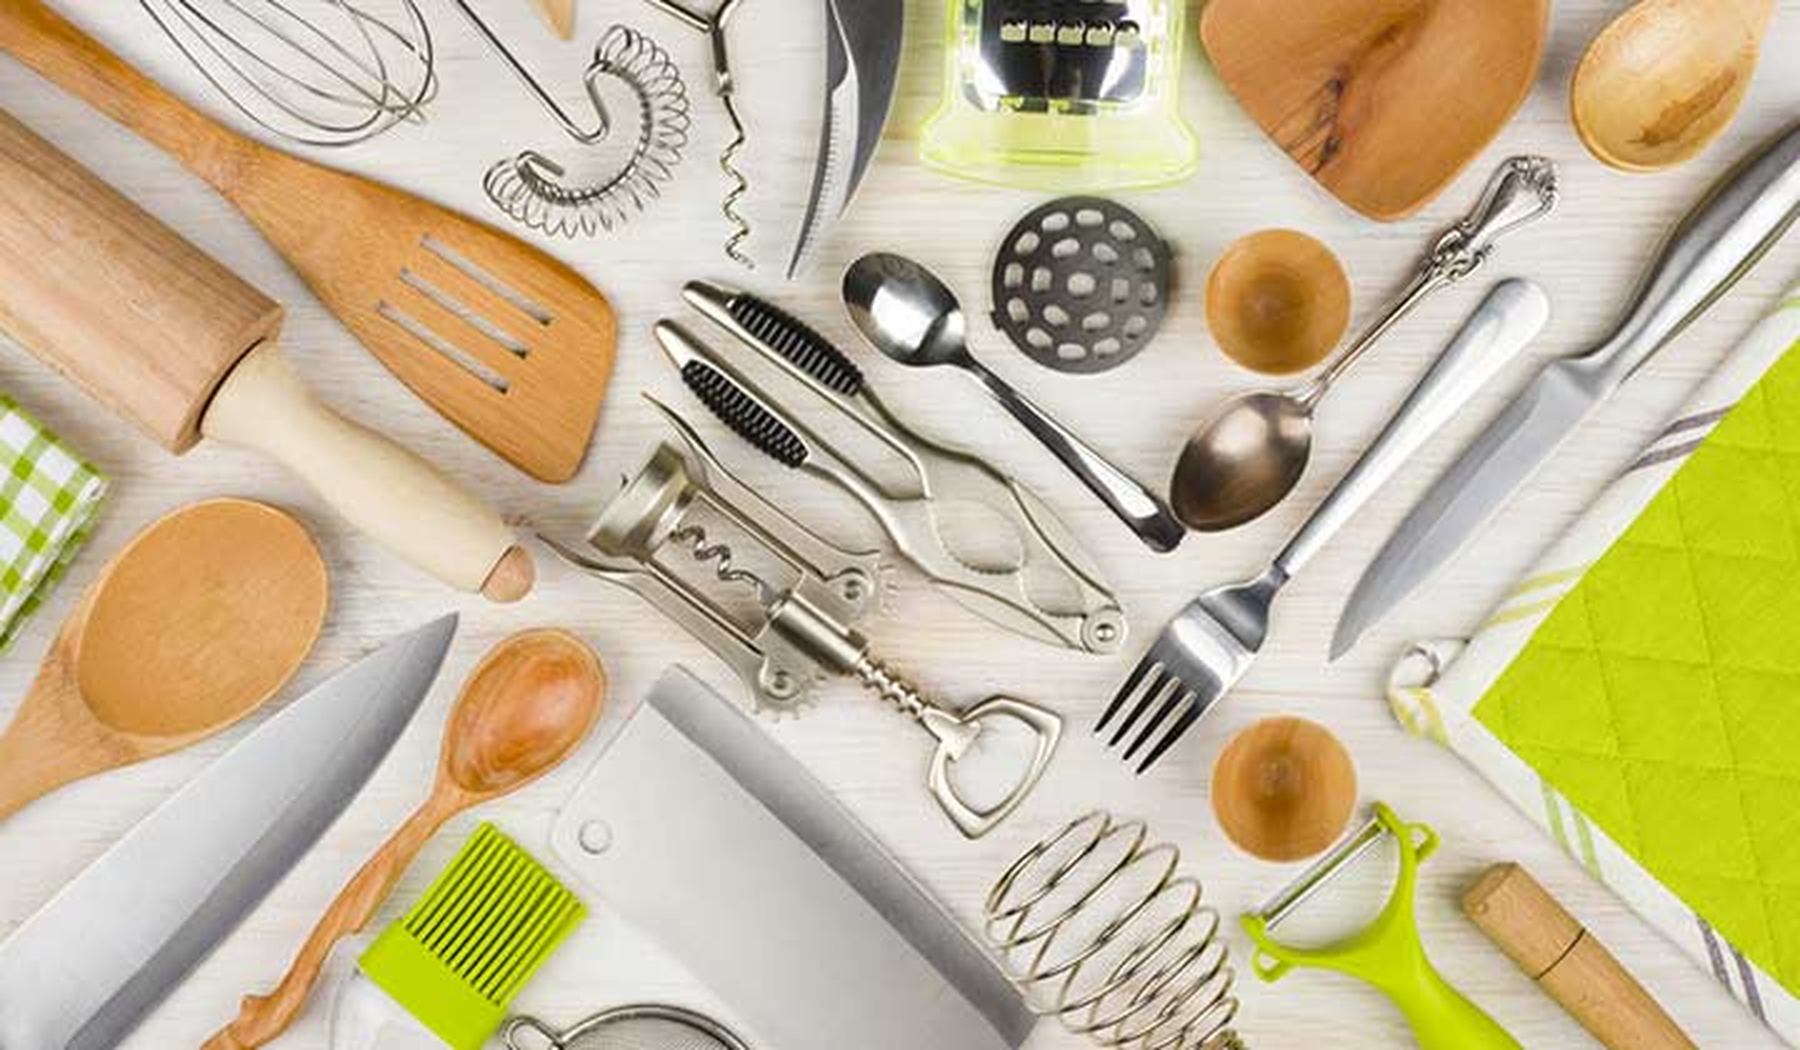 Various kitchen tools arranged on a counter